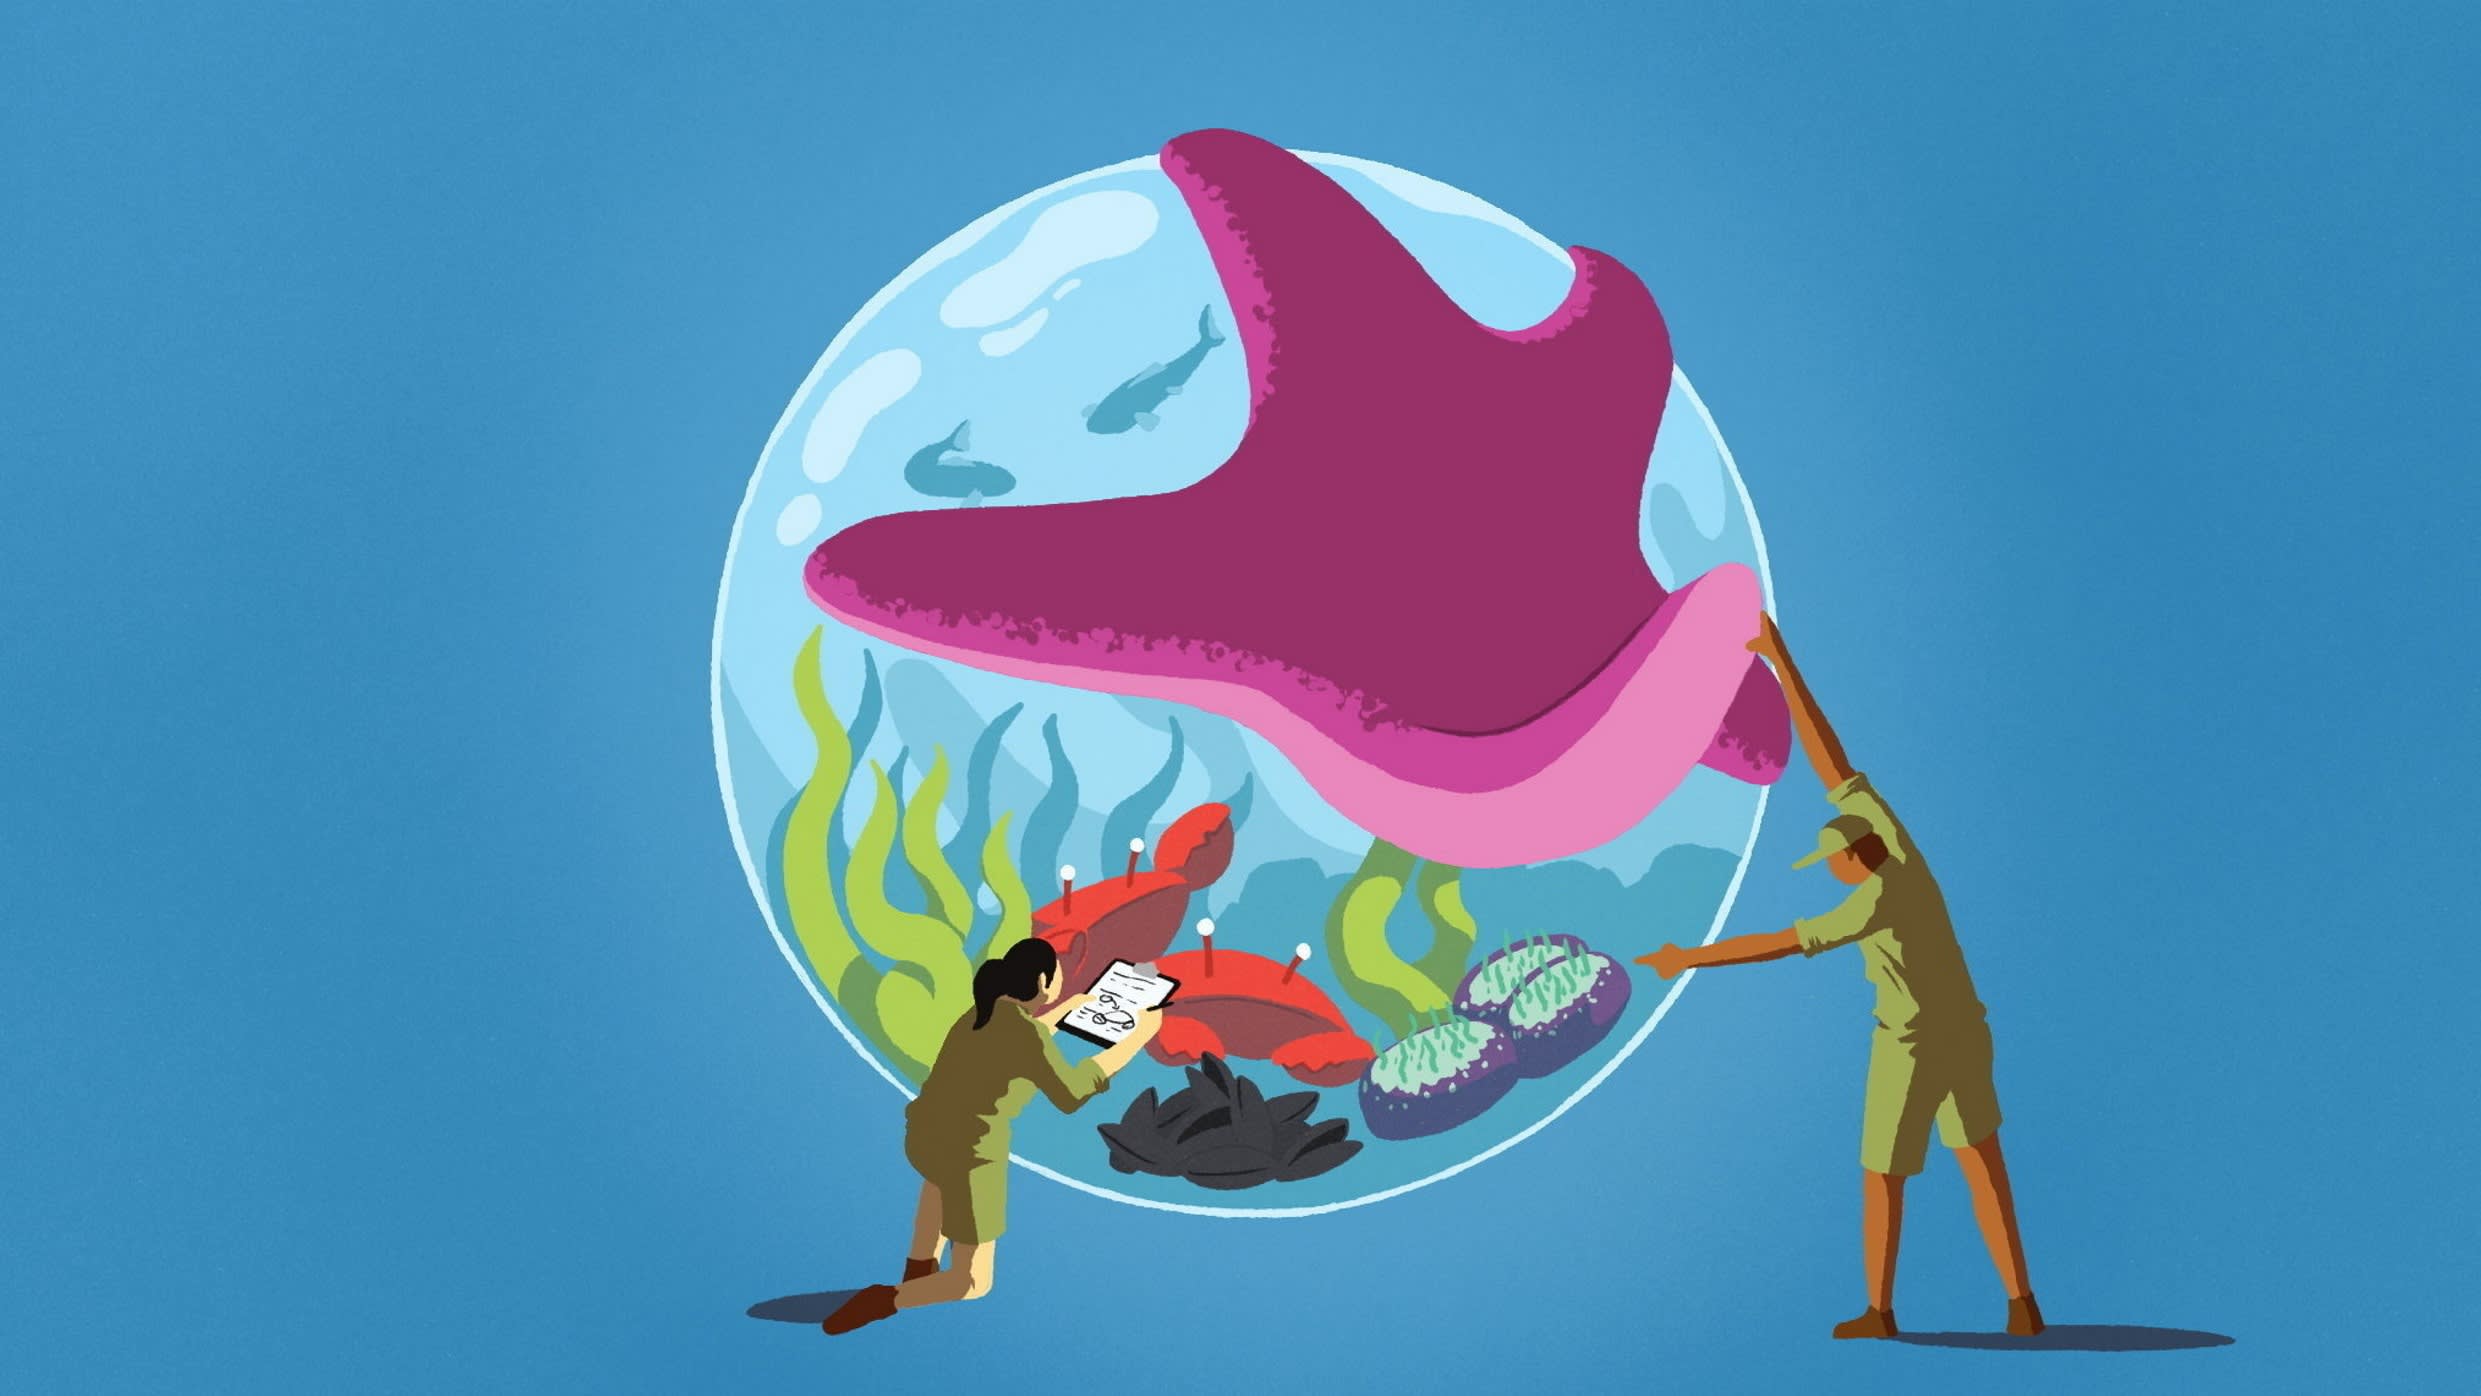 Andy Carter illustration of two conservationists looking into a habitat ‘orb’, with a large starfish clinging on to show the large impact it has. However, the conservationists are peeling back one of it’s legs and looking instead at the overall habitat as well.